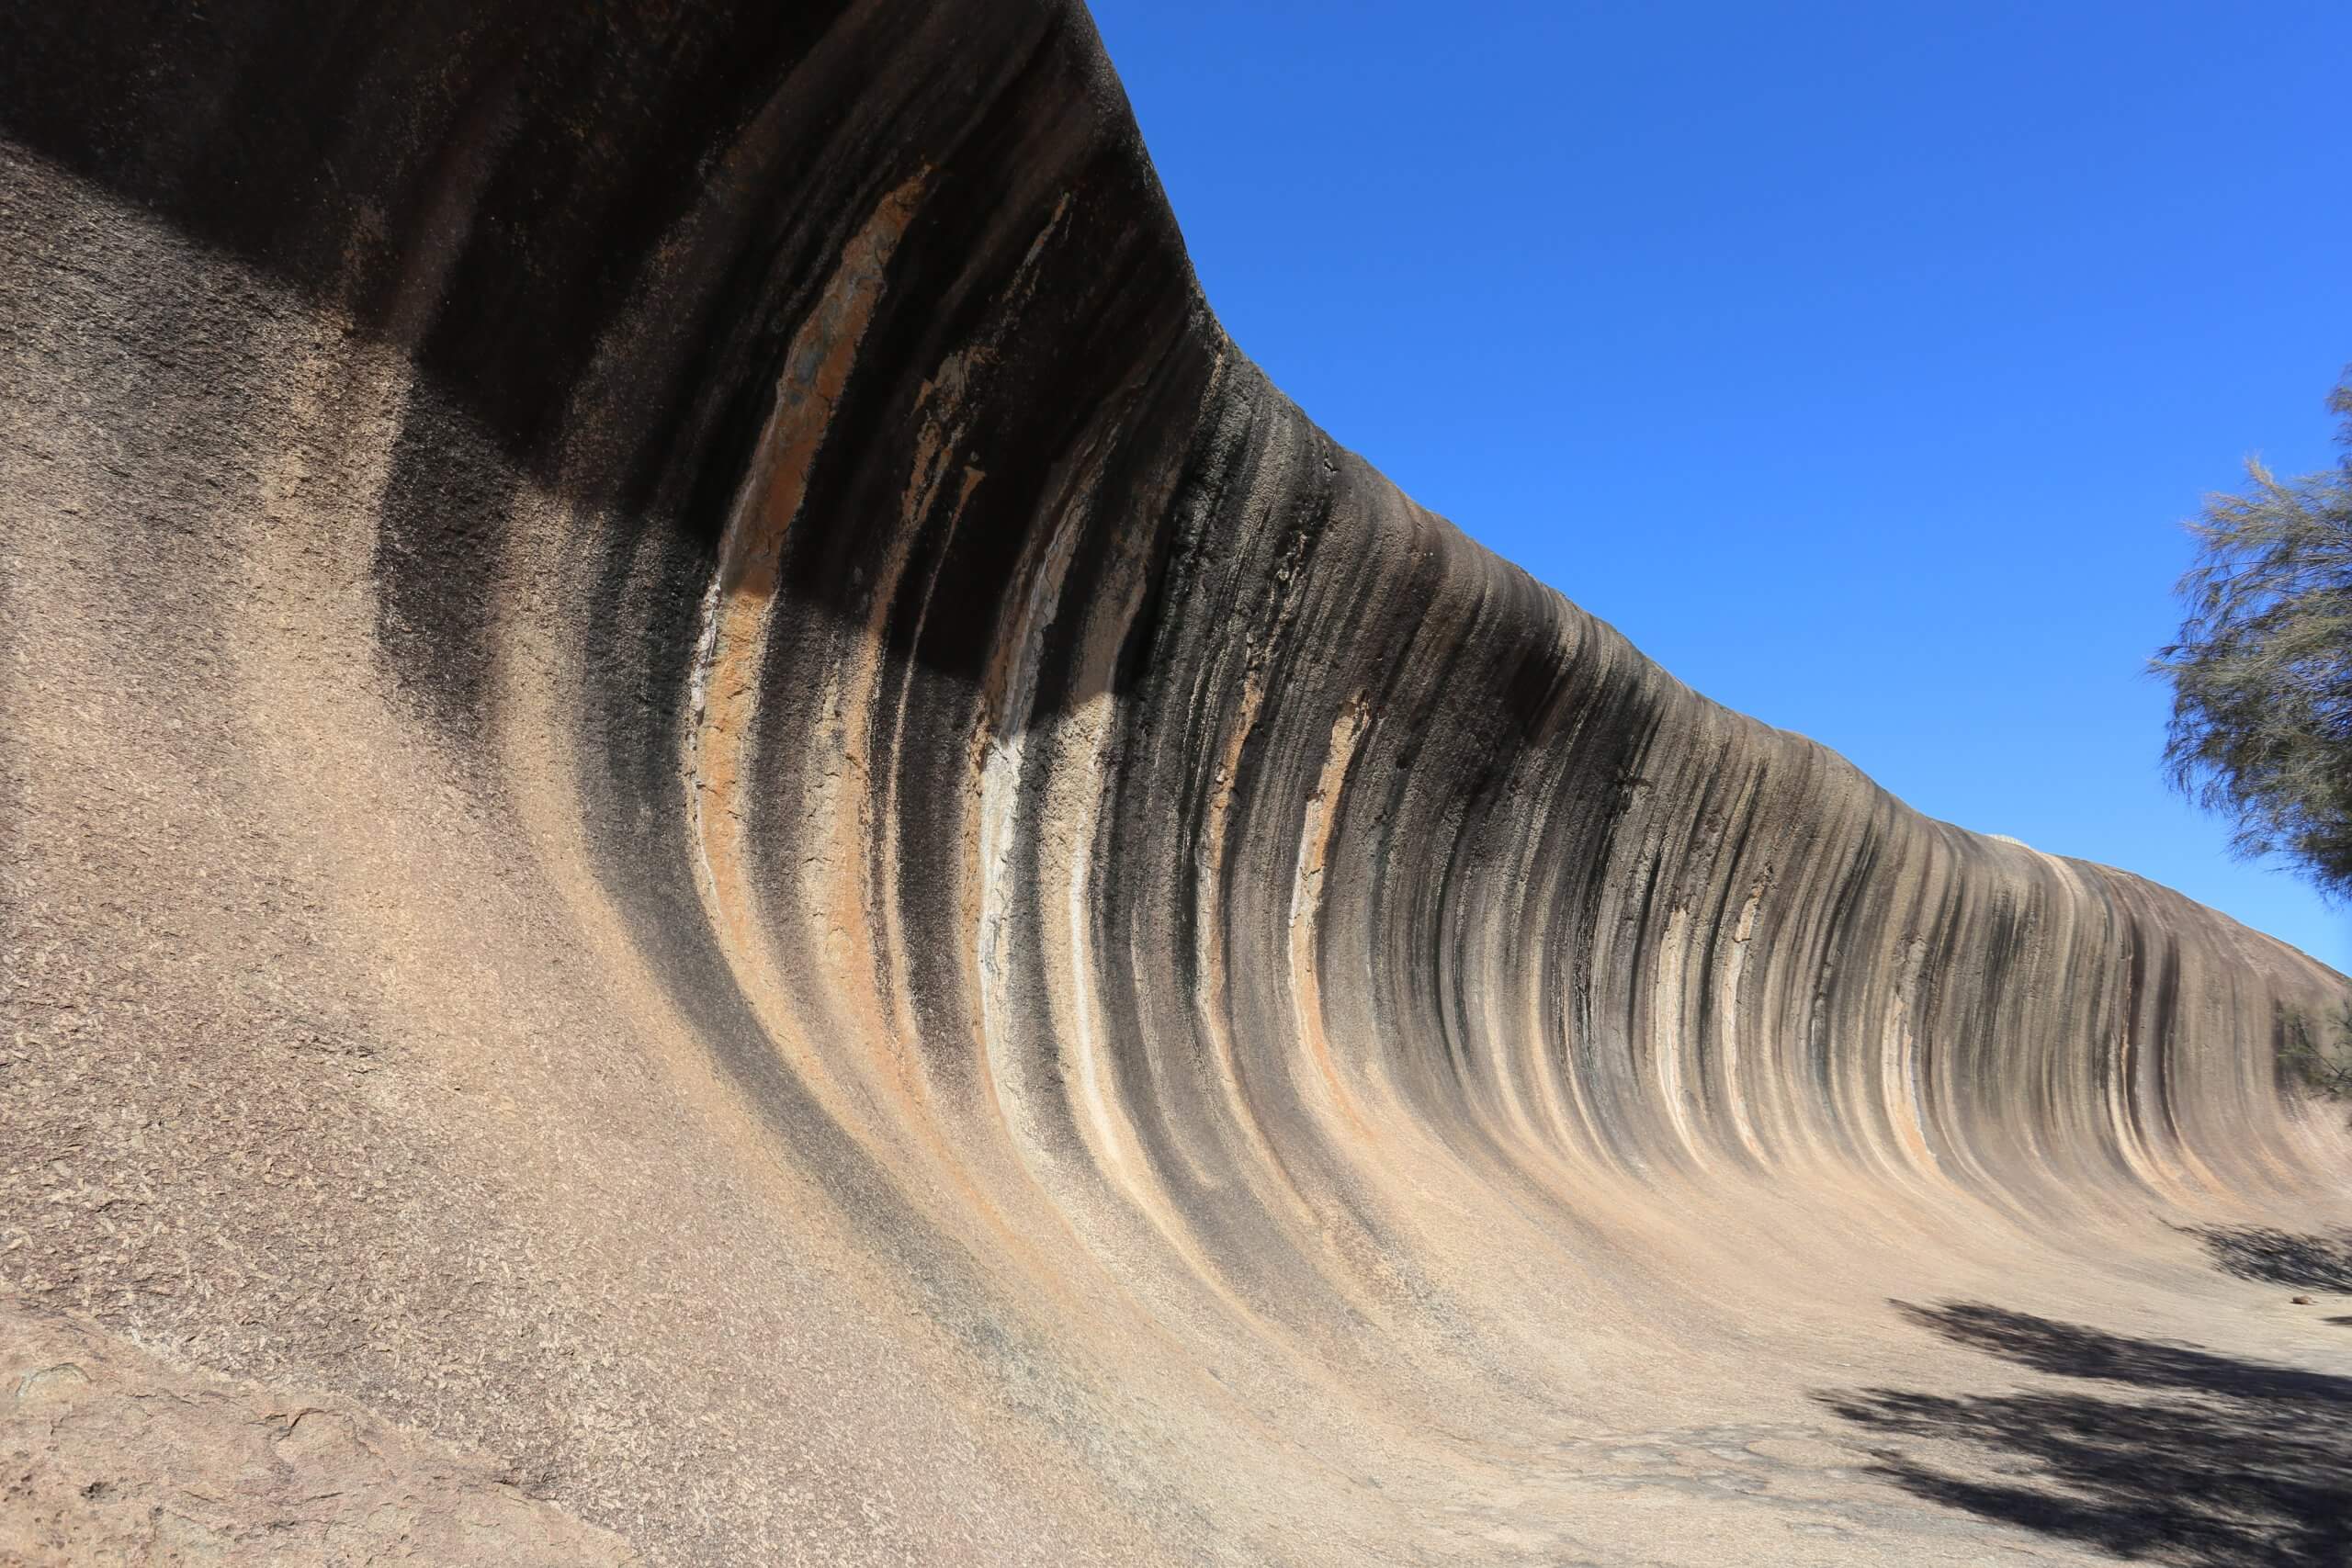 Located in Hyden, Wave Rock is a natural, inland, rock formation that is shaped like a tall breaking ocean wave.